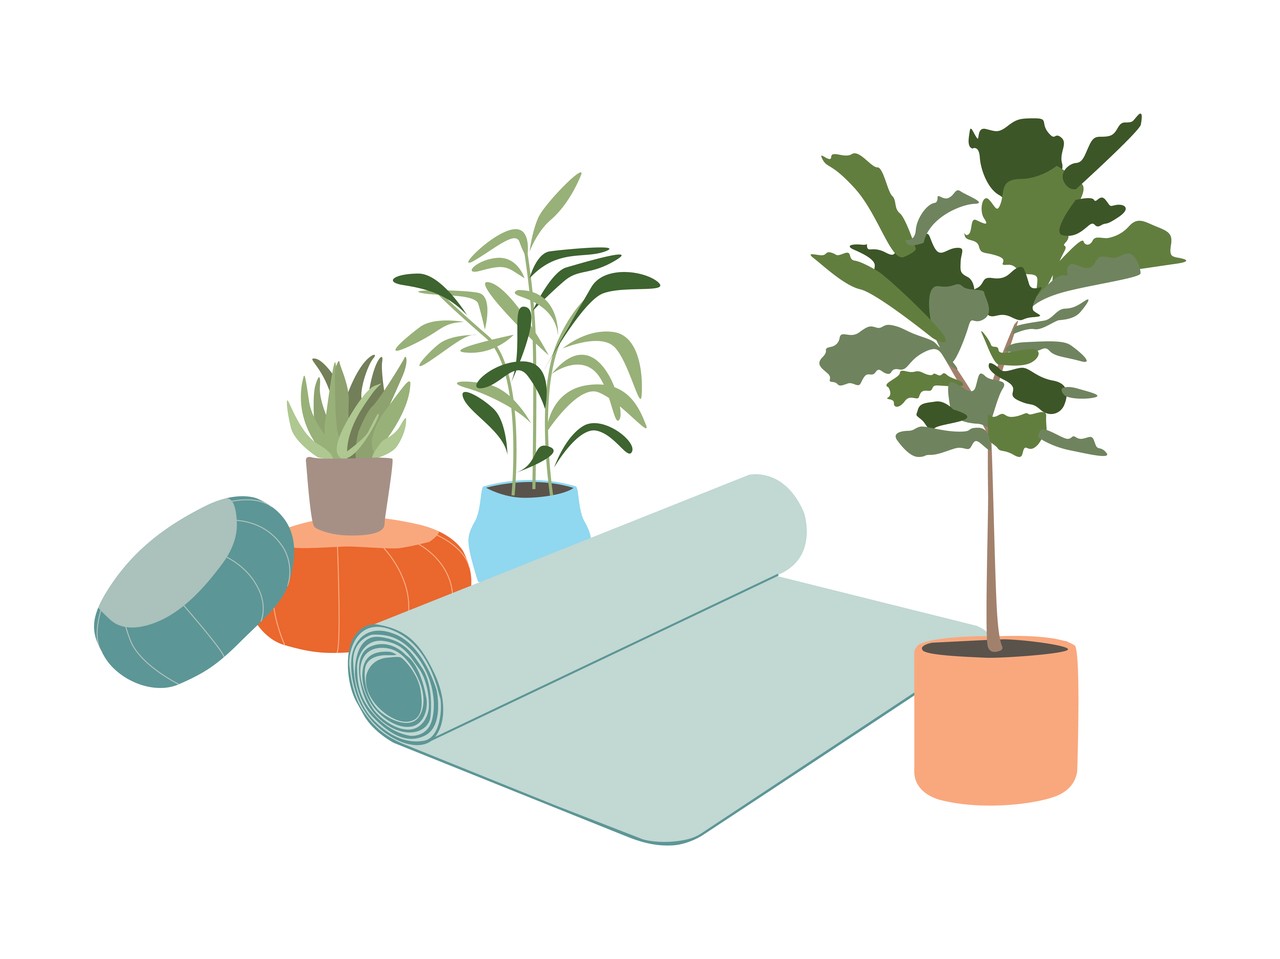 illustration of a yoga mat, meditation cushions, and some house plants